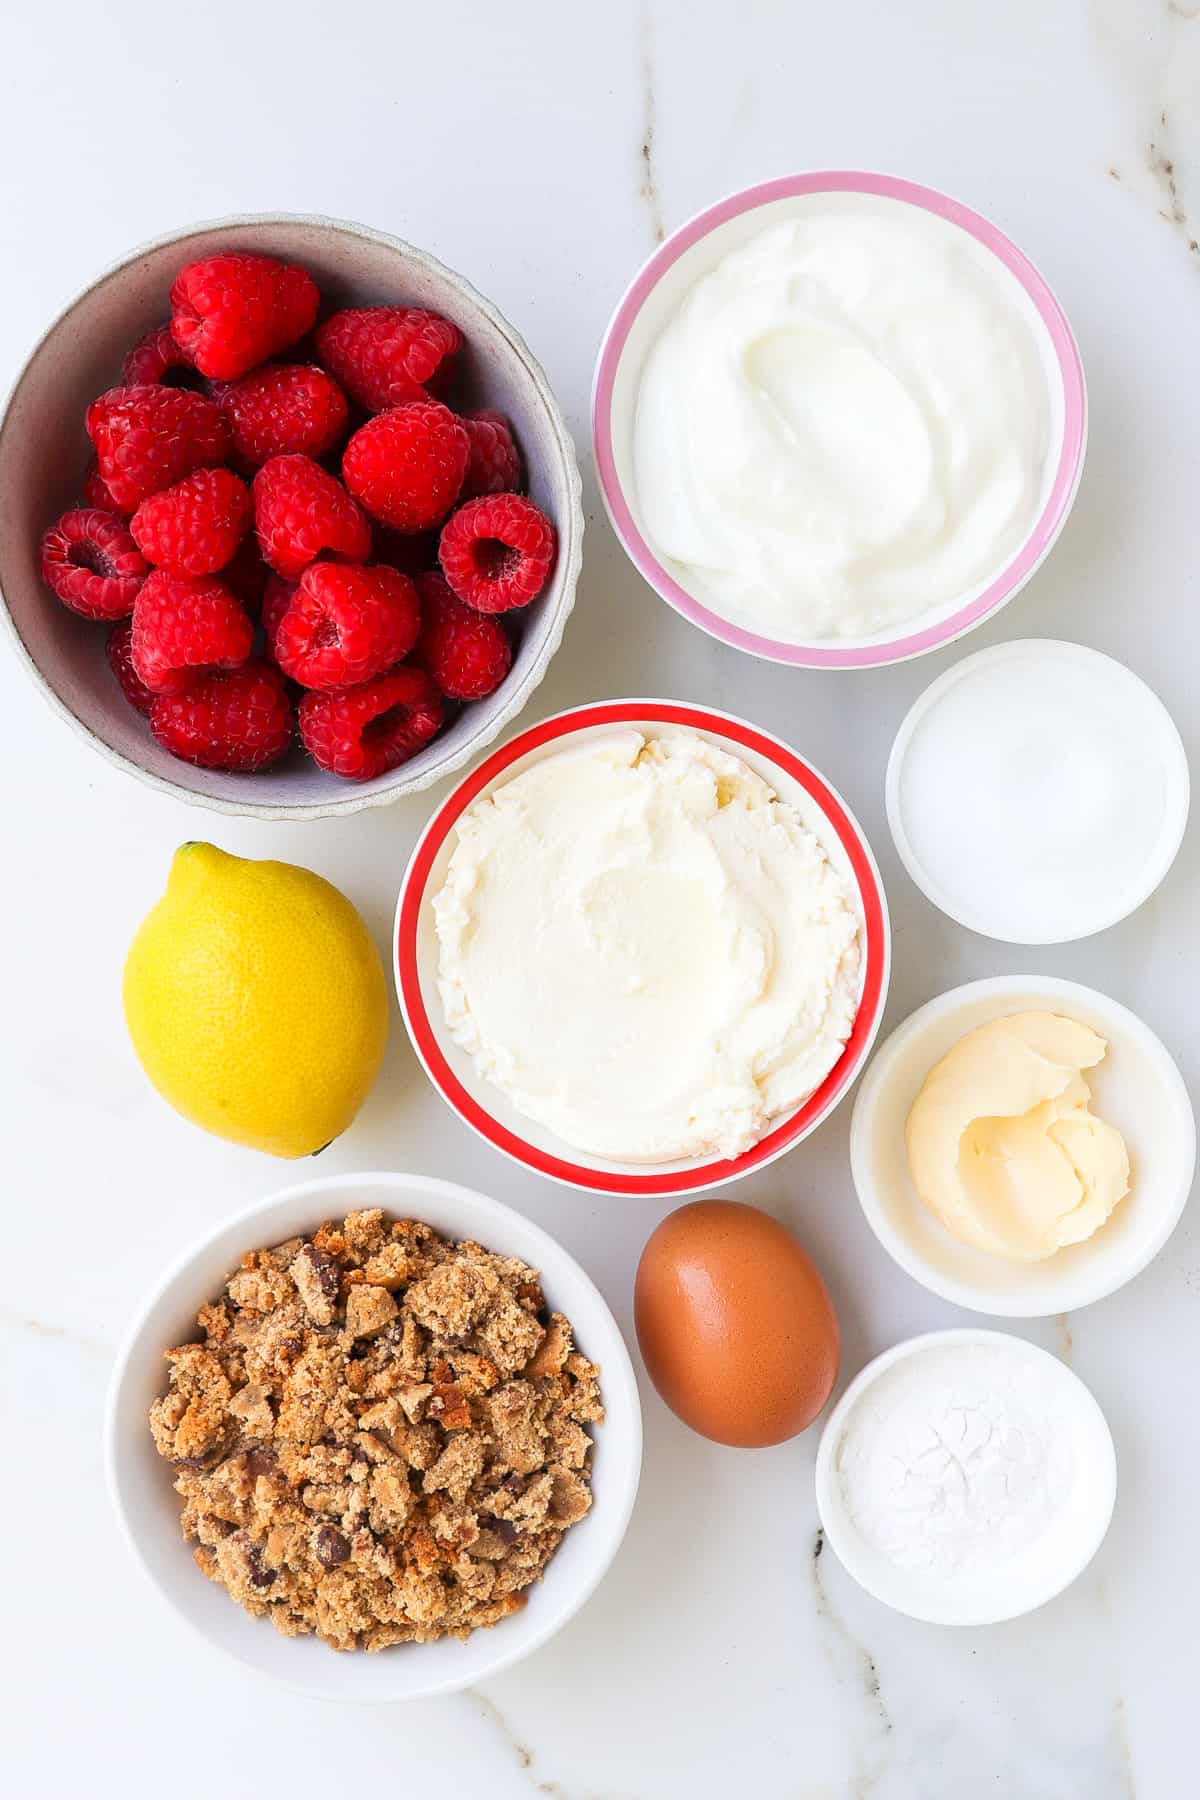 Ingredients shown to make high protein cheesecakes.